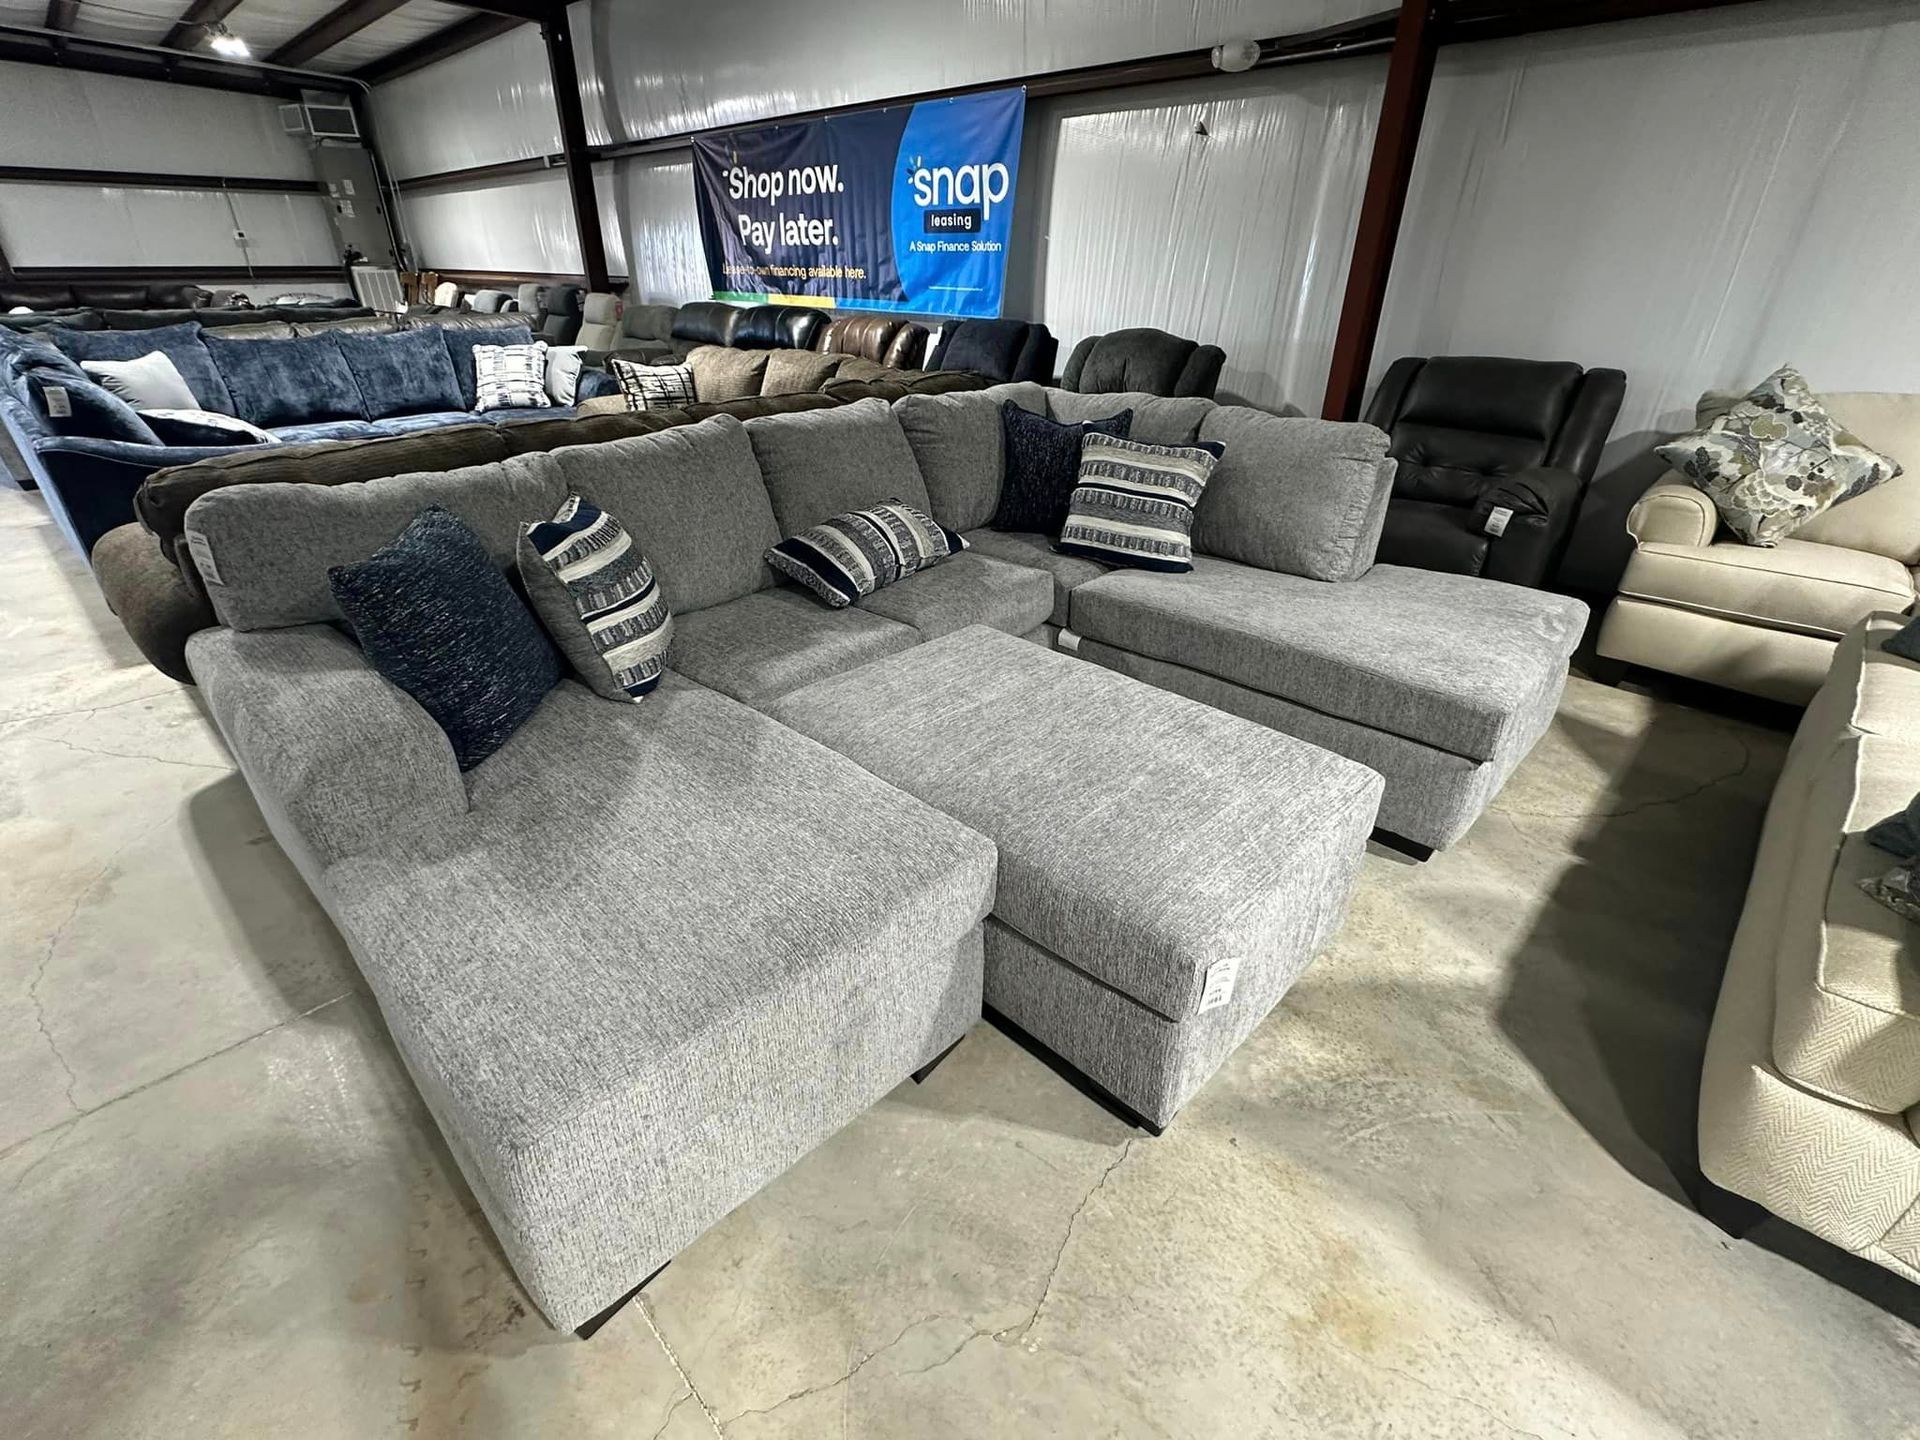 A large sectional couch is sitting in a warehouse surrounded by other furniture.